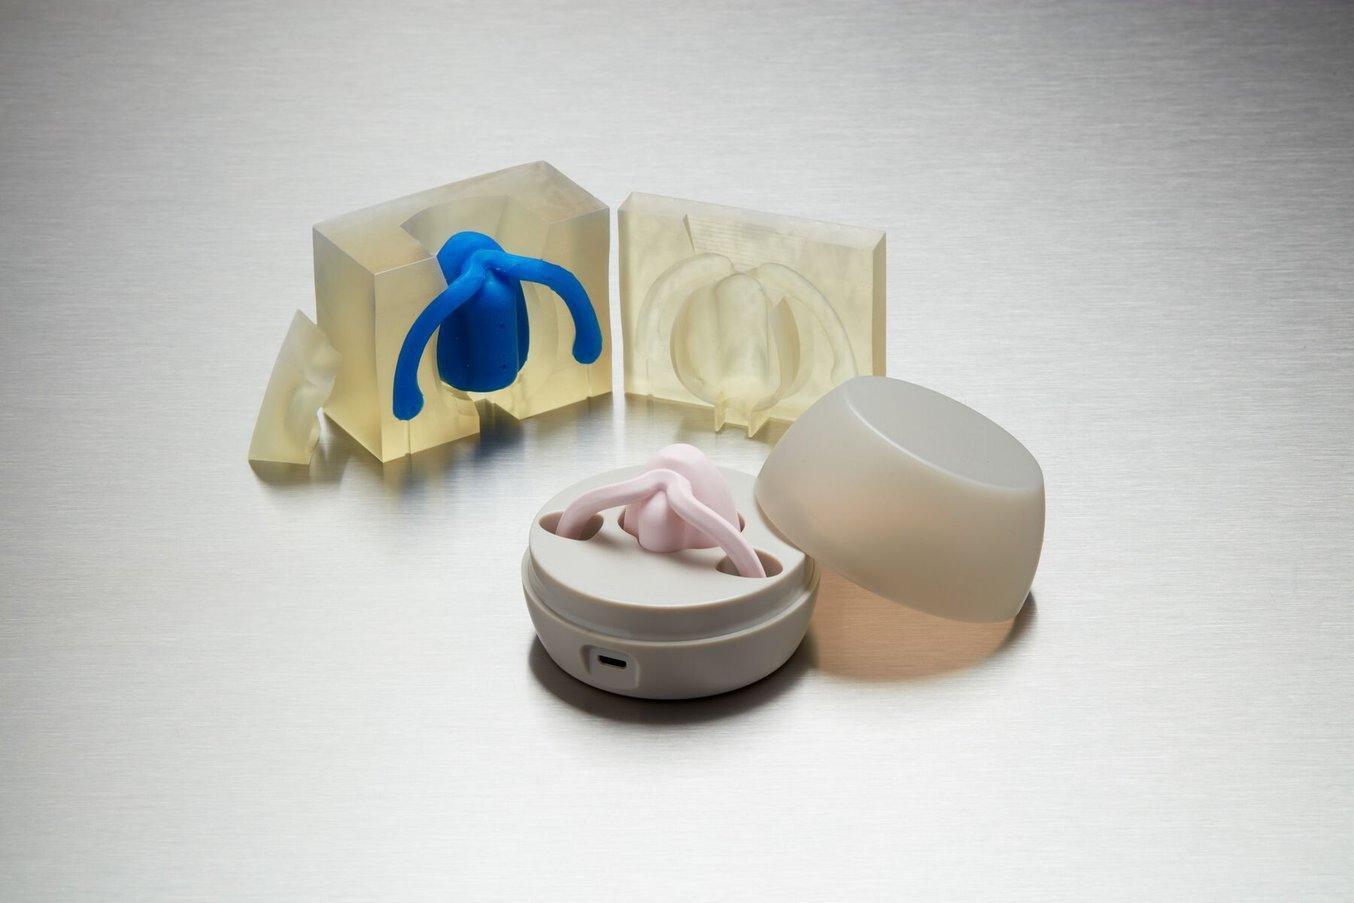 Dame Products employs silicone insert molding to encapsulate internal hardware for customer beta prototypes.